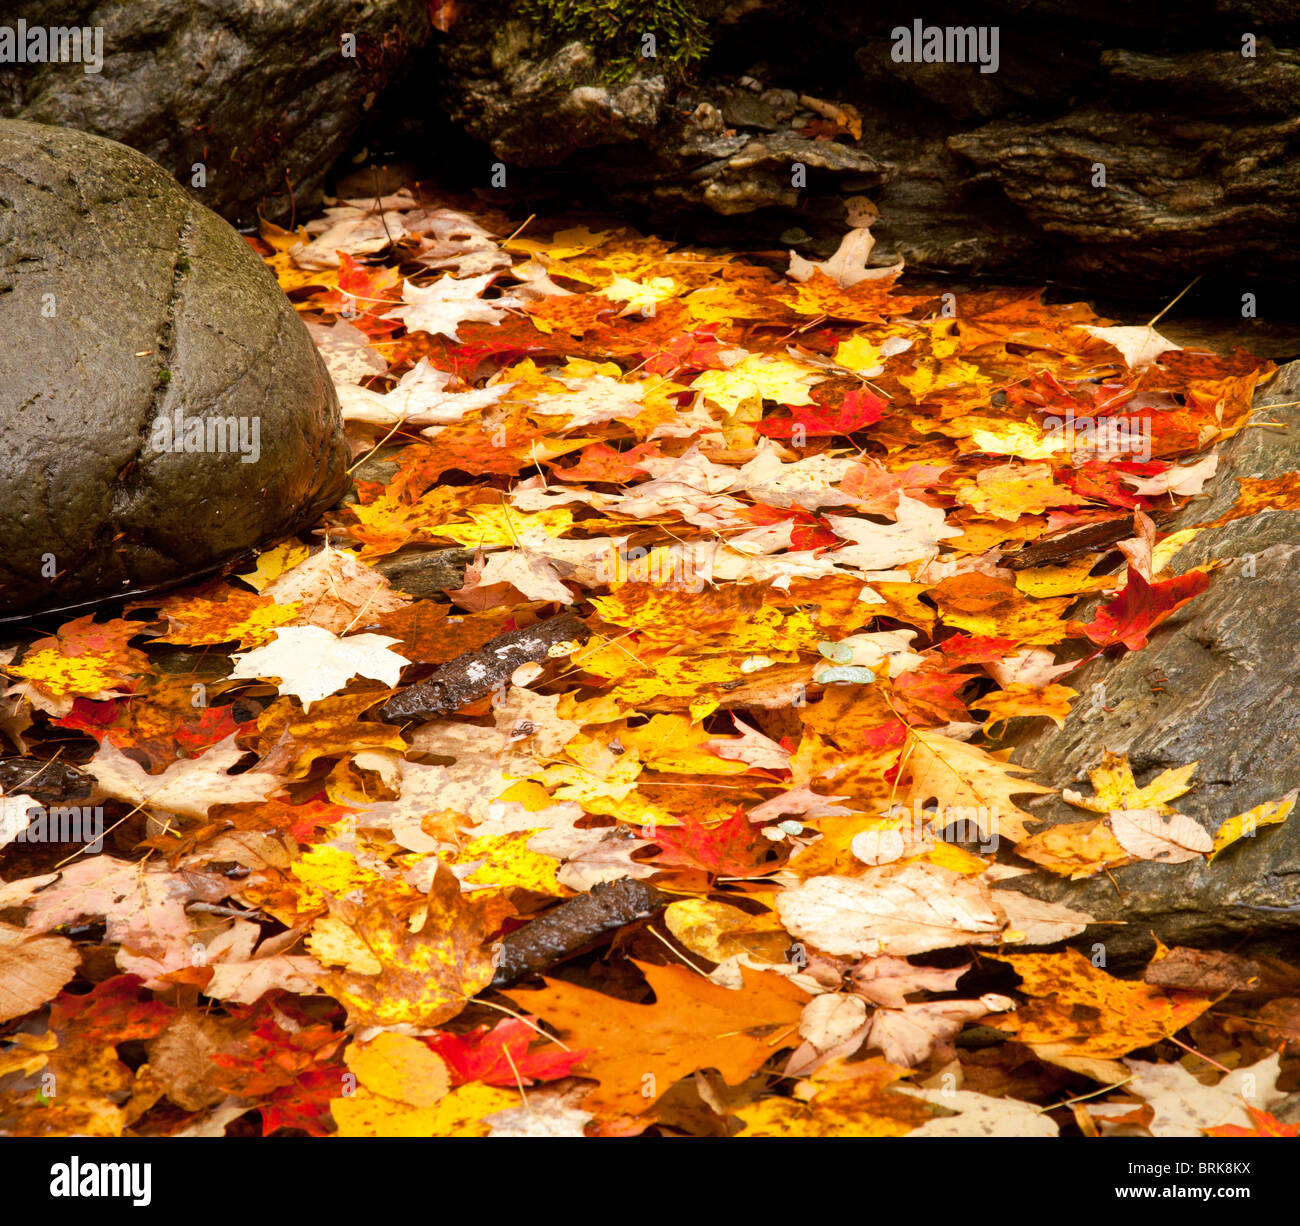 Brightly colored autumn leaves in a shallow river with rocks Stock Photo